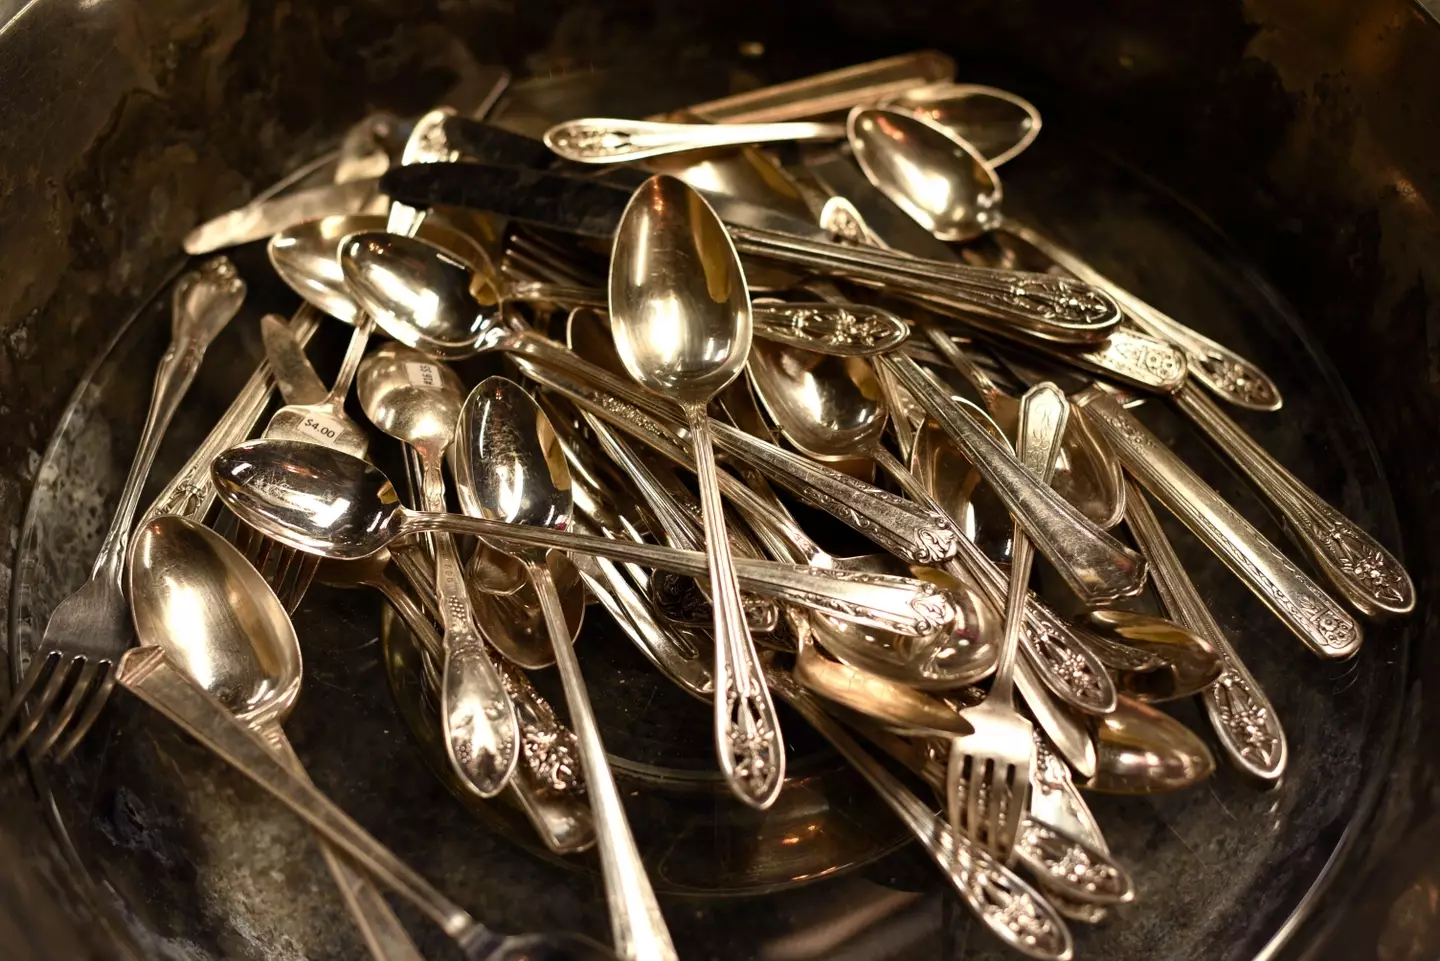 Get your cutlery sparkling (